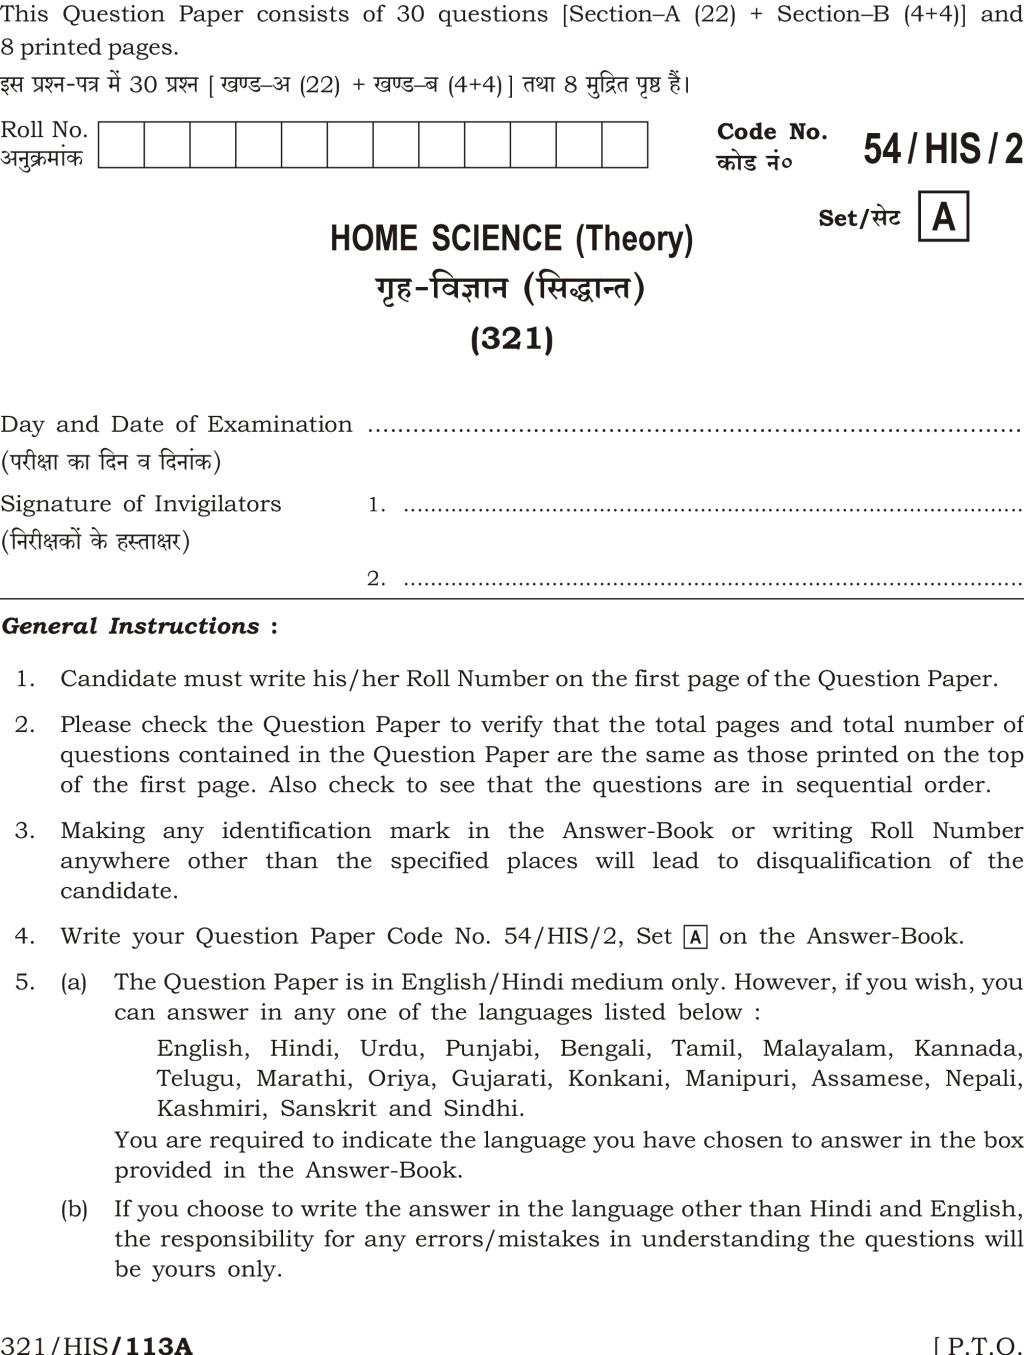 NIOS Class 12 Question Paper Apr 2017 - Home Science - Page 1